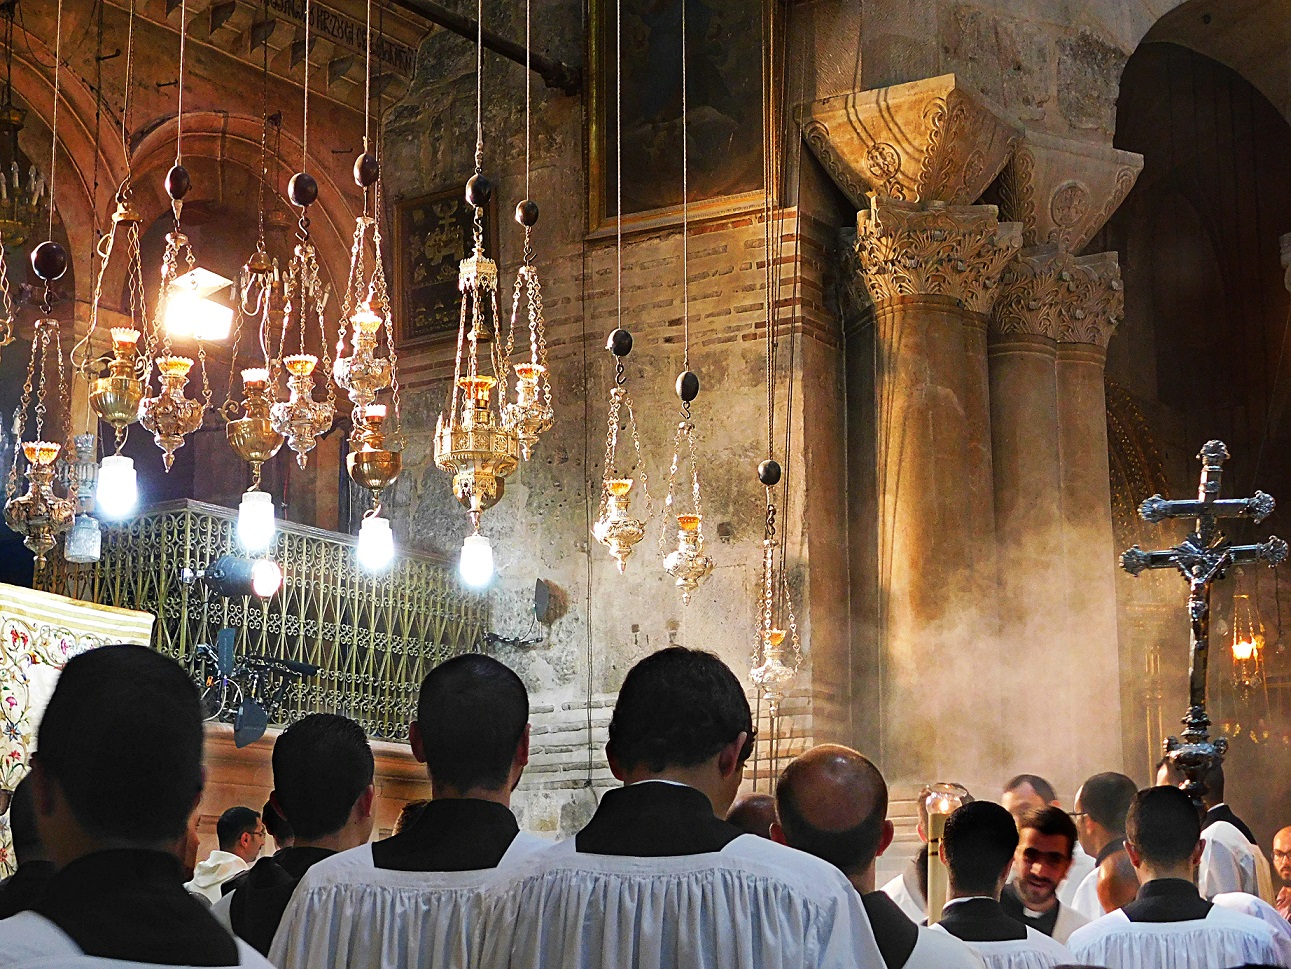 Liturgical celebrations in the Basilica of the Holy Sepulcher, photo credit: Sr. Amata CSFN